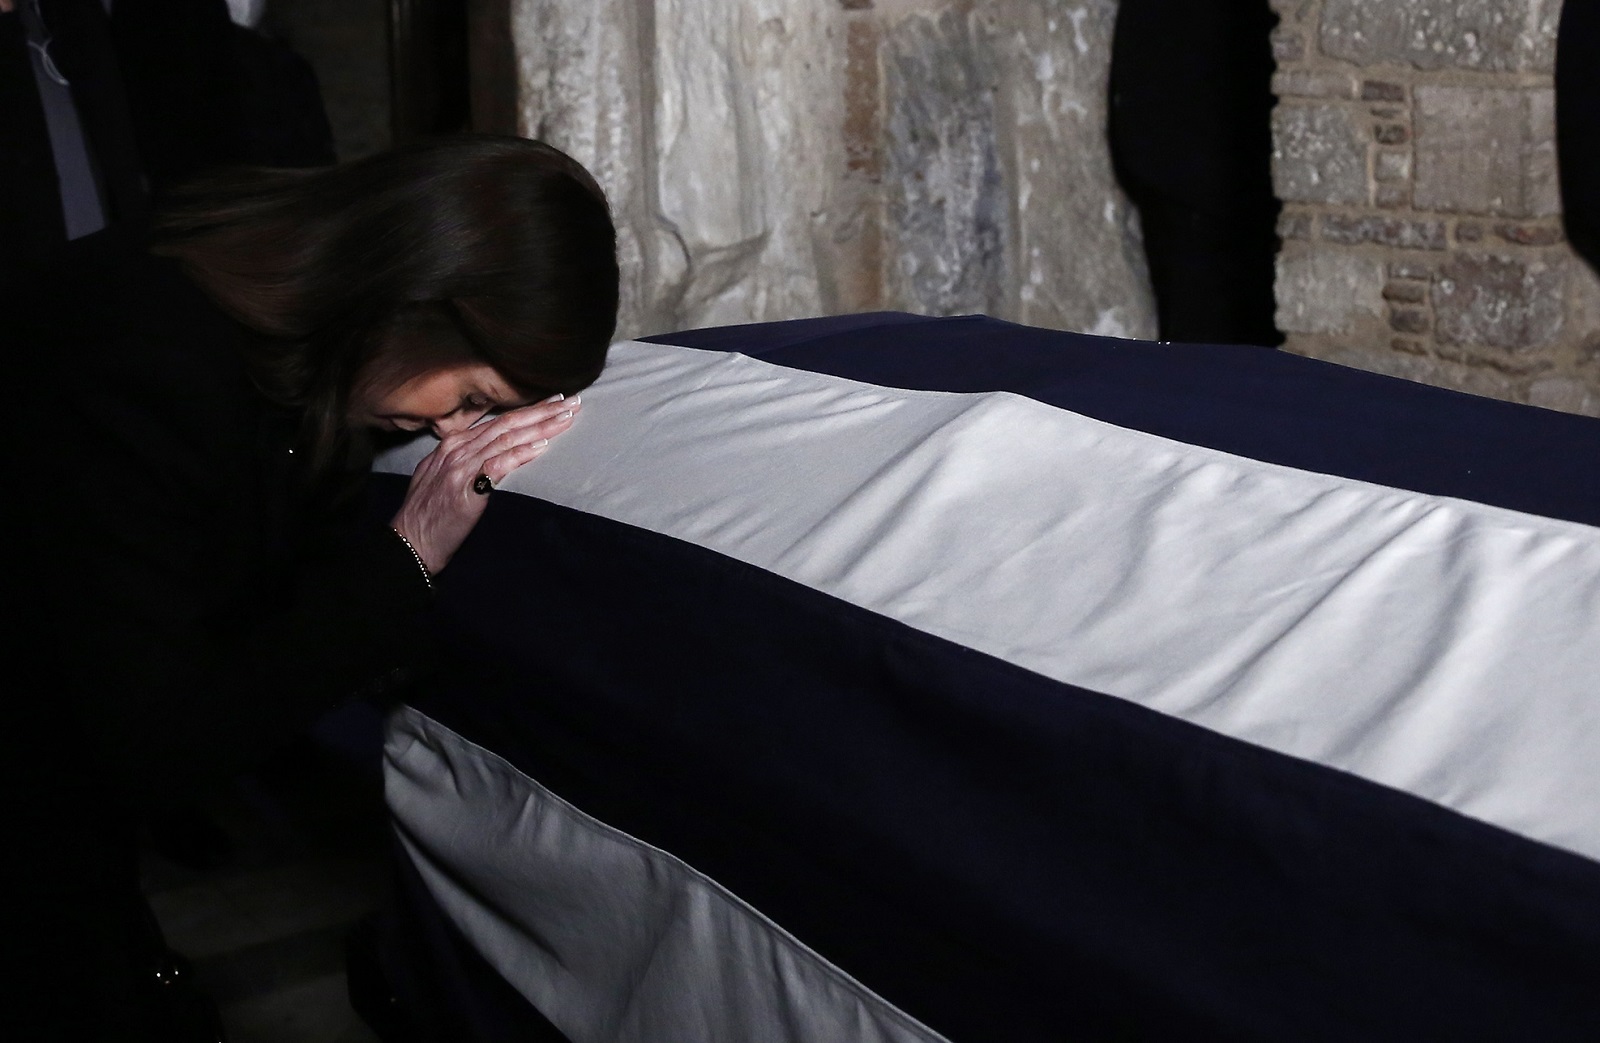 epa10408350 A woman pays her respects to the former King Constantine II, at Saint Eleftherios chapel of the Metropolis Ctahedral in Athens, Greece, 16 January 2023. Greece's former King Constantine II died at the age of 82 on 10 January 2023. The funeral service is due to take place at the Metropolis Cathedral of Athen and he will be burried near the graves of his ancestrors at the Tatoi former royal palace.  EPA/YANNIS KOLESIDID